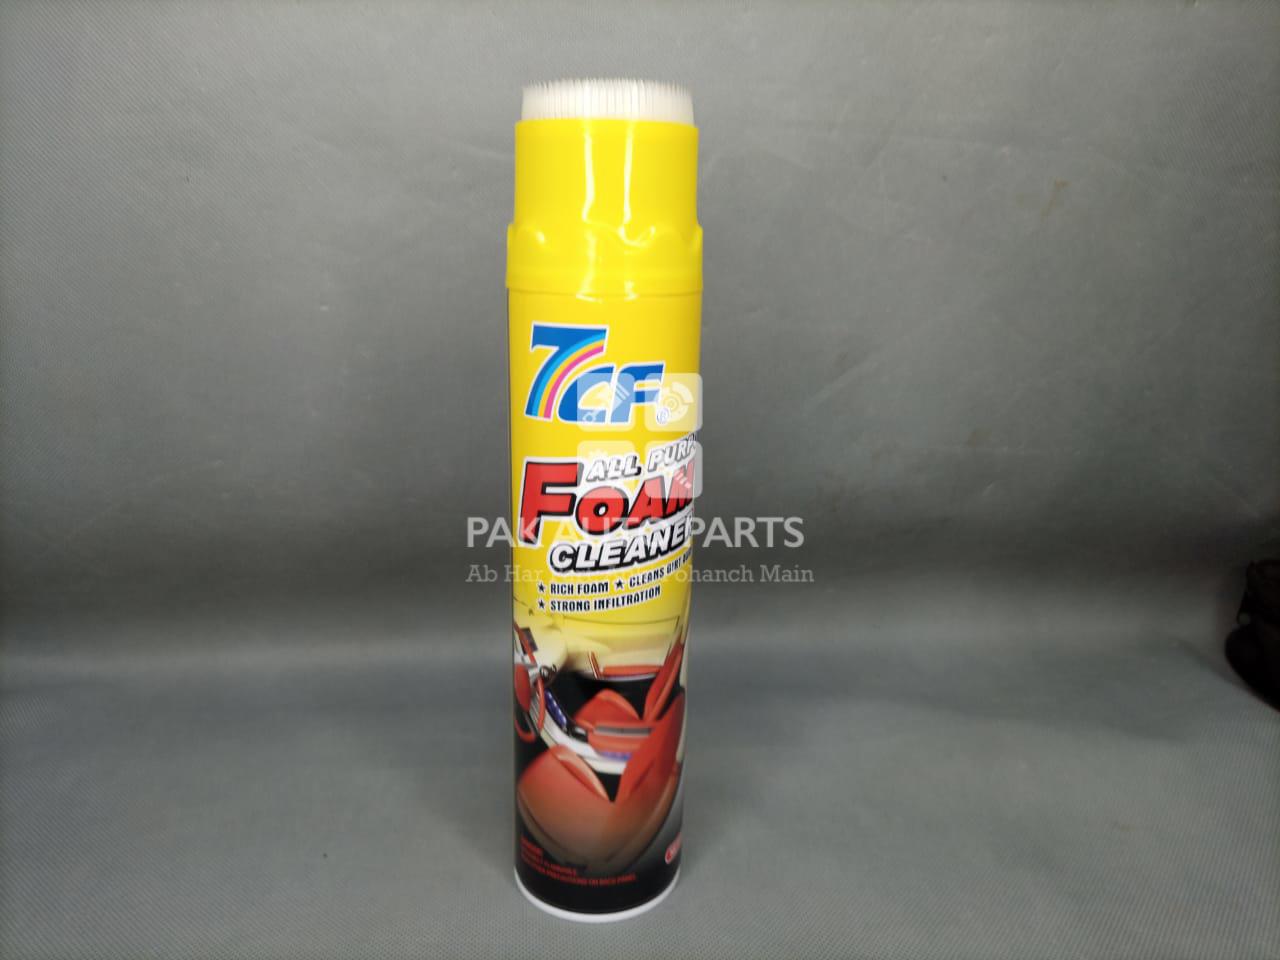 Picture of 7CF Foam Cleaner (All Purpose) For Hosiery Fabric Etc. - 650 ml